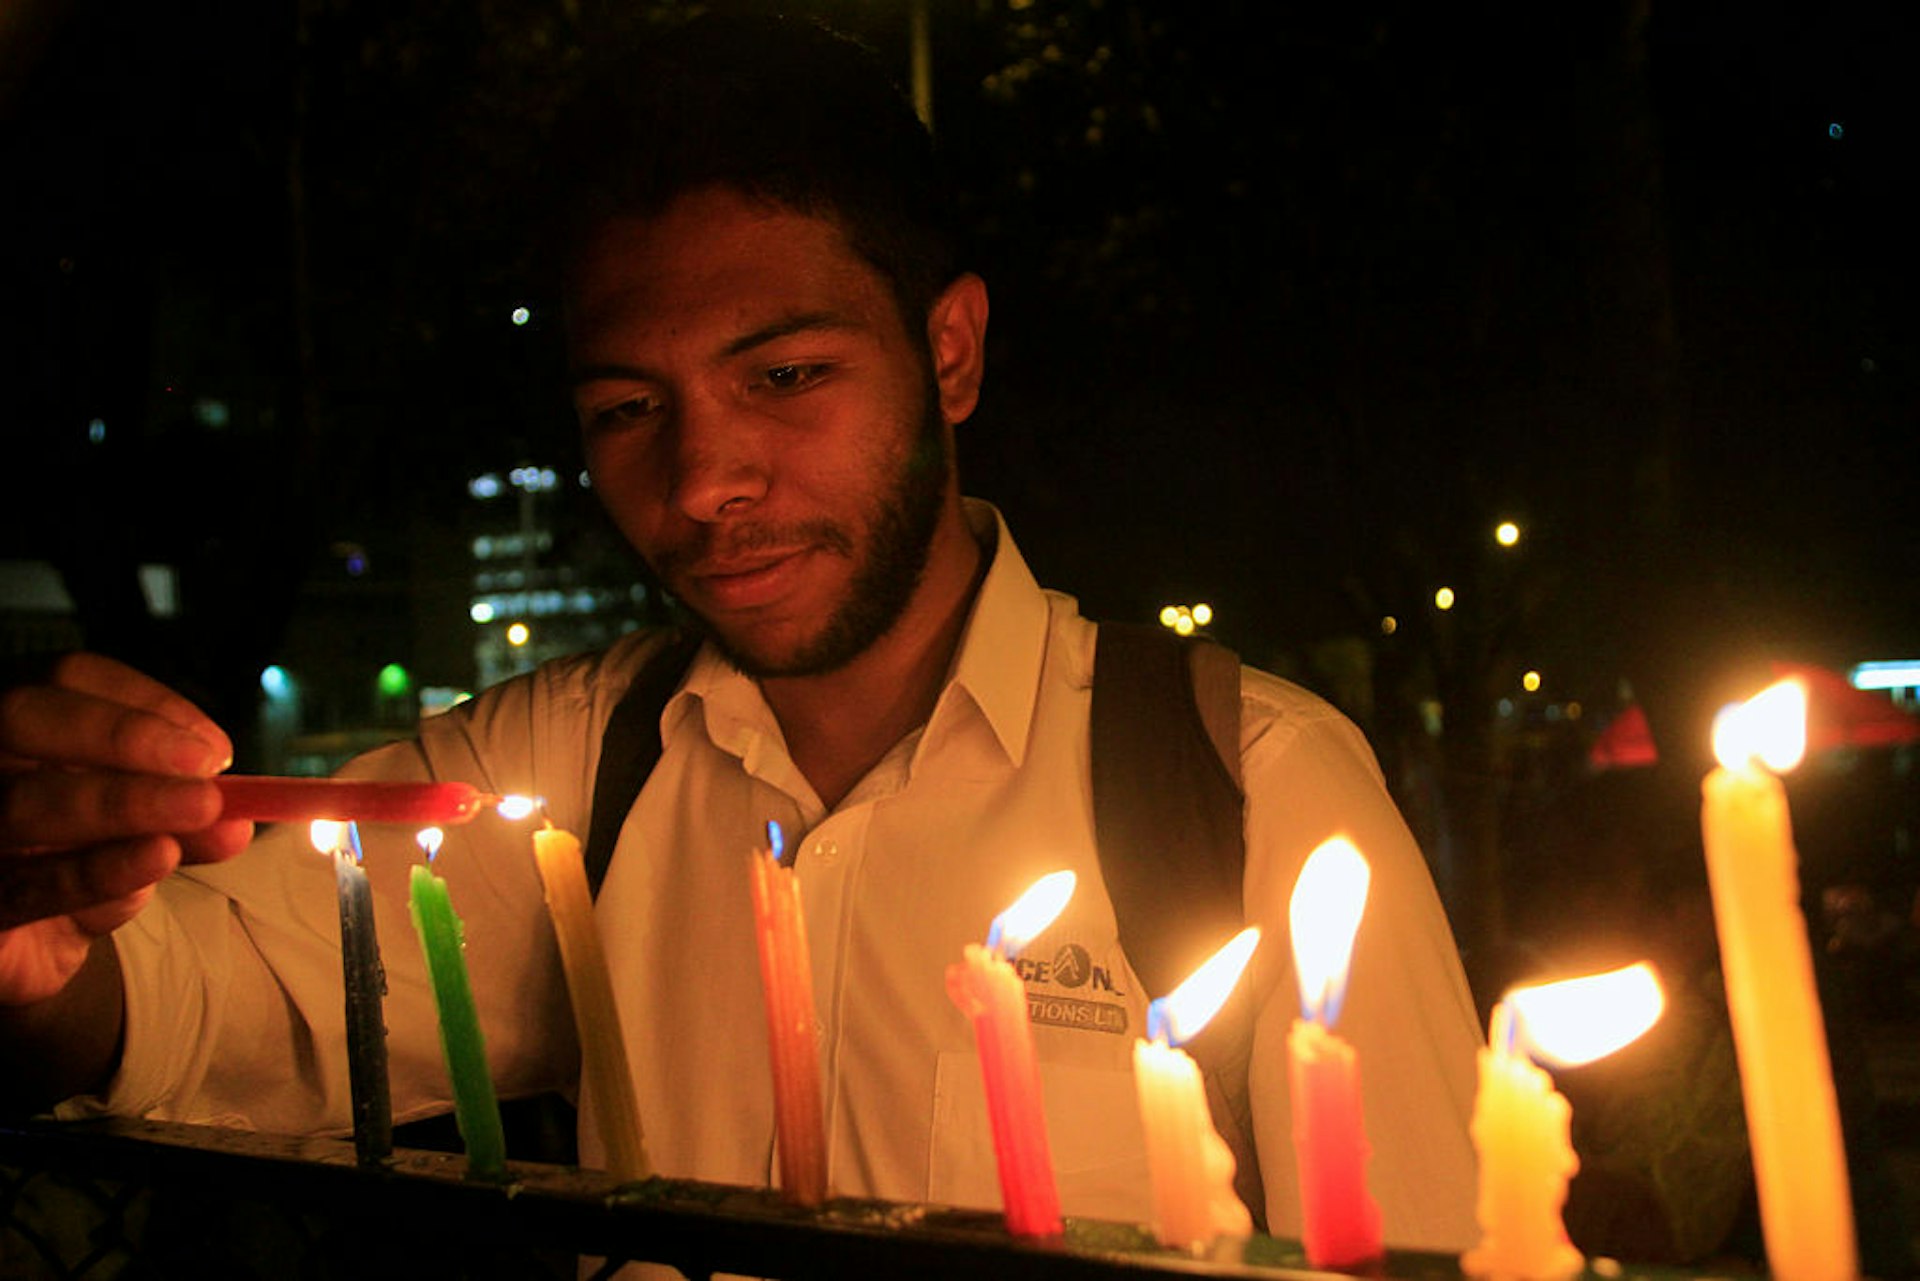 A man is lighting some candles during the "Night of Candles